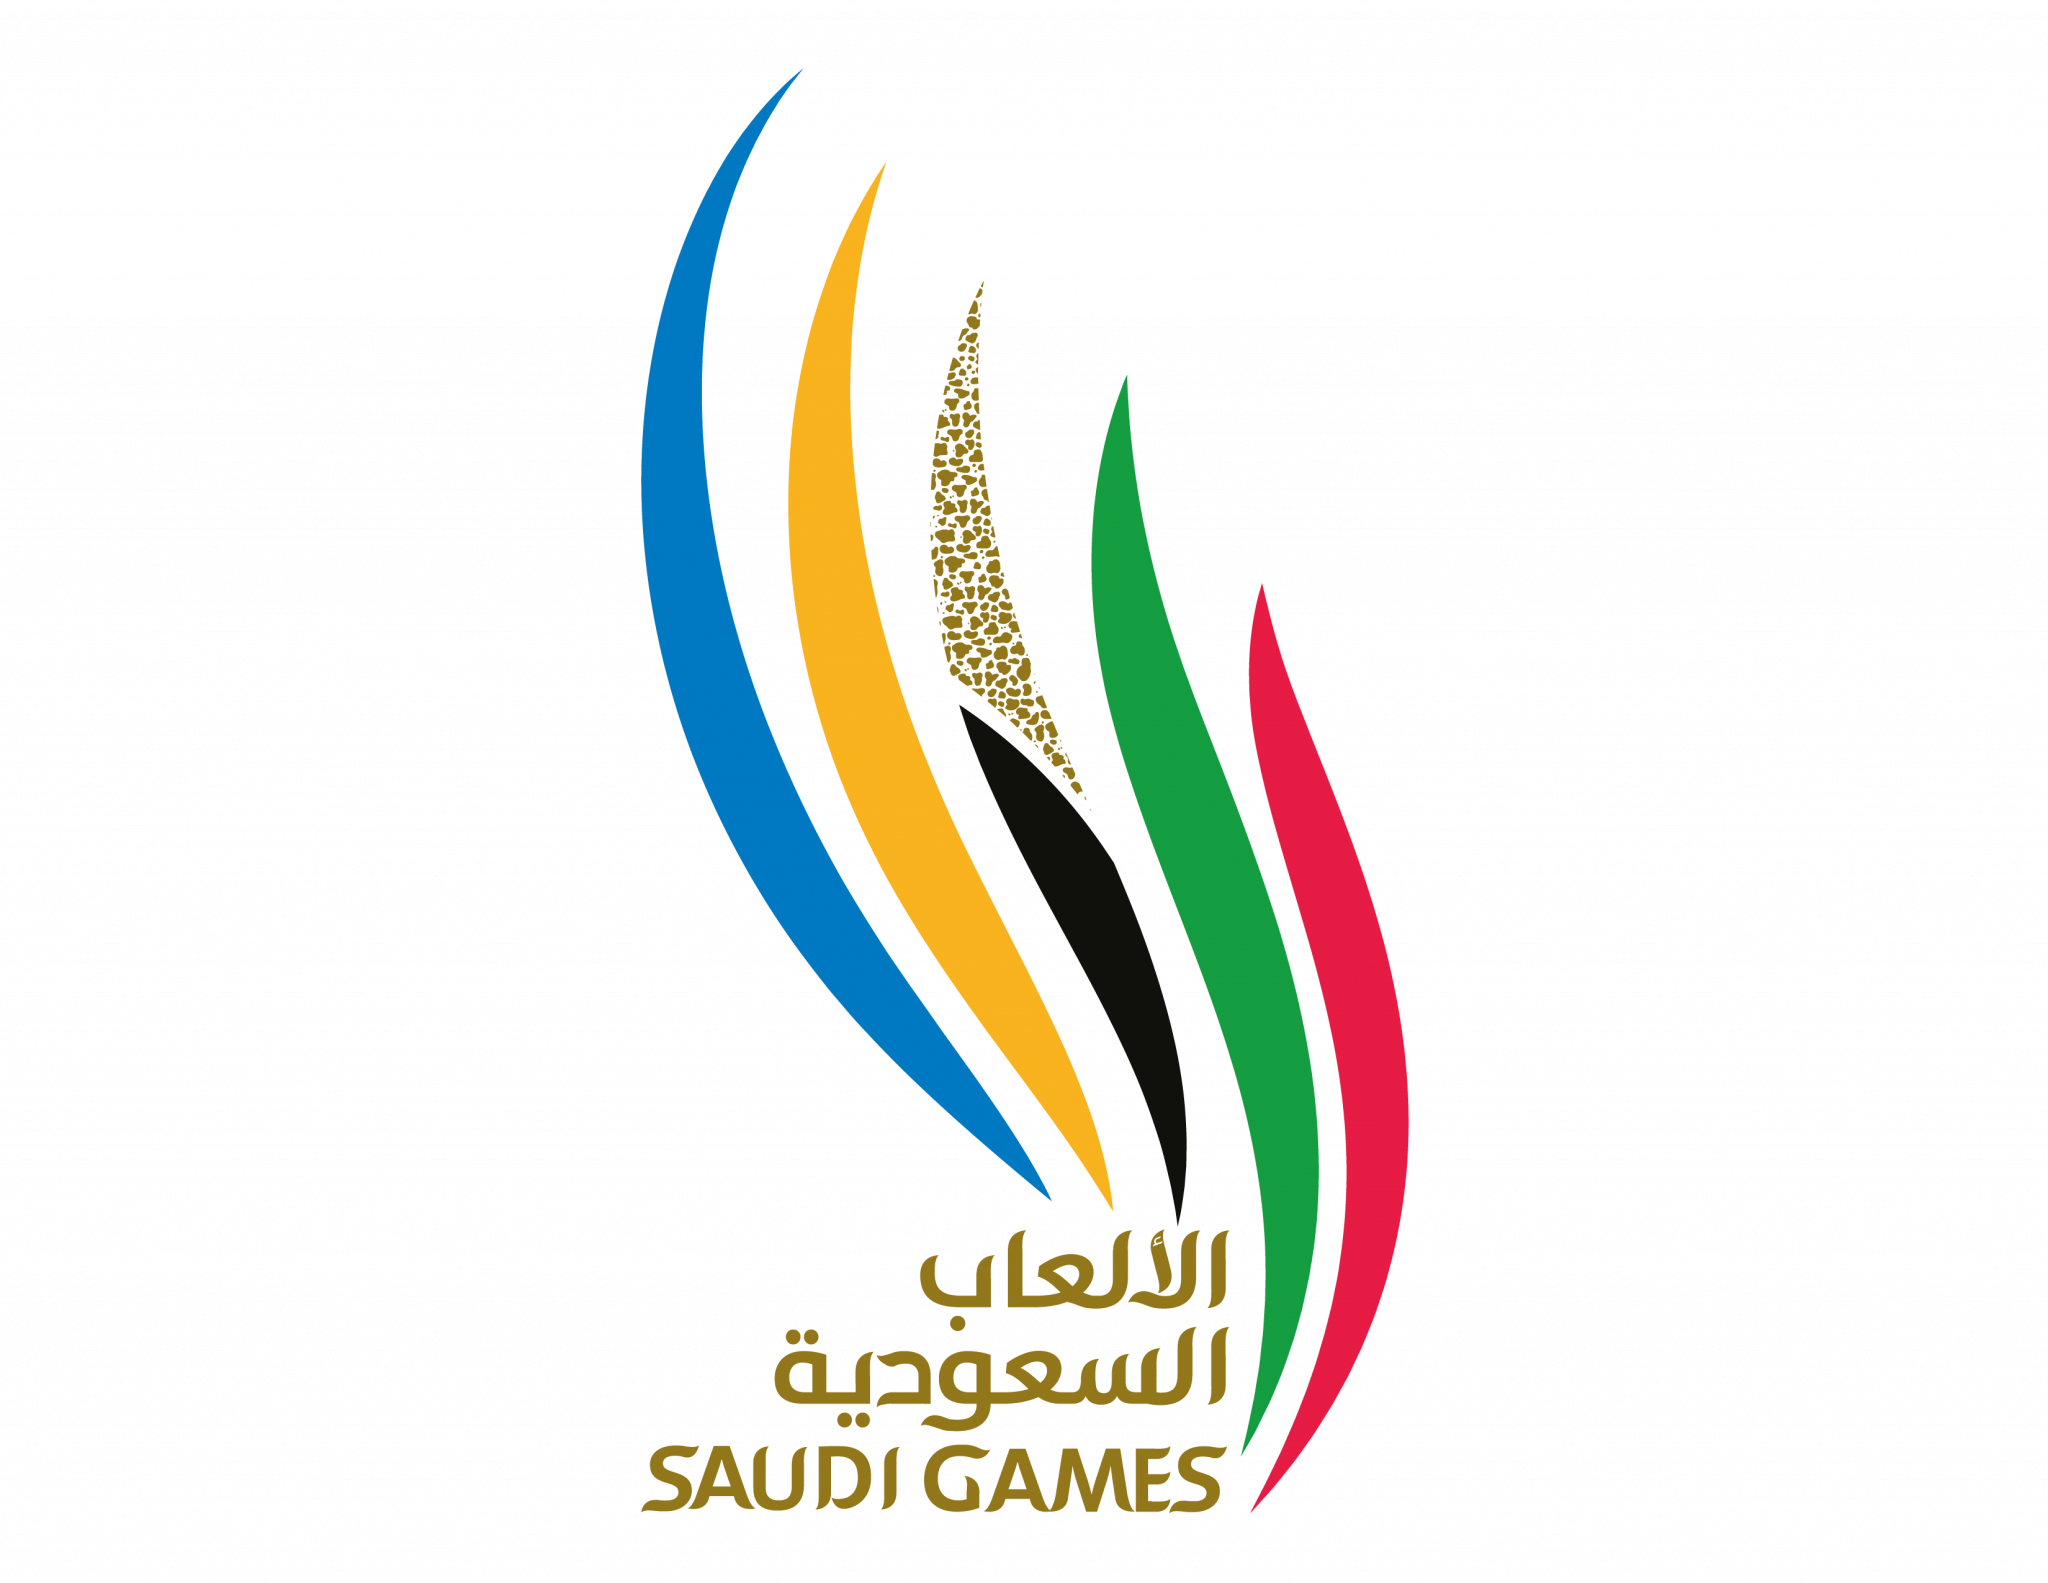 More than 6,000 athletes set to participate in 2022 Saudi Games